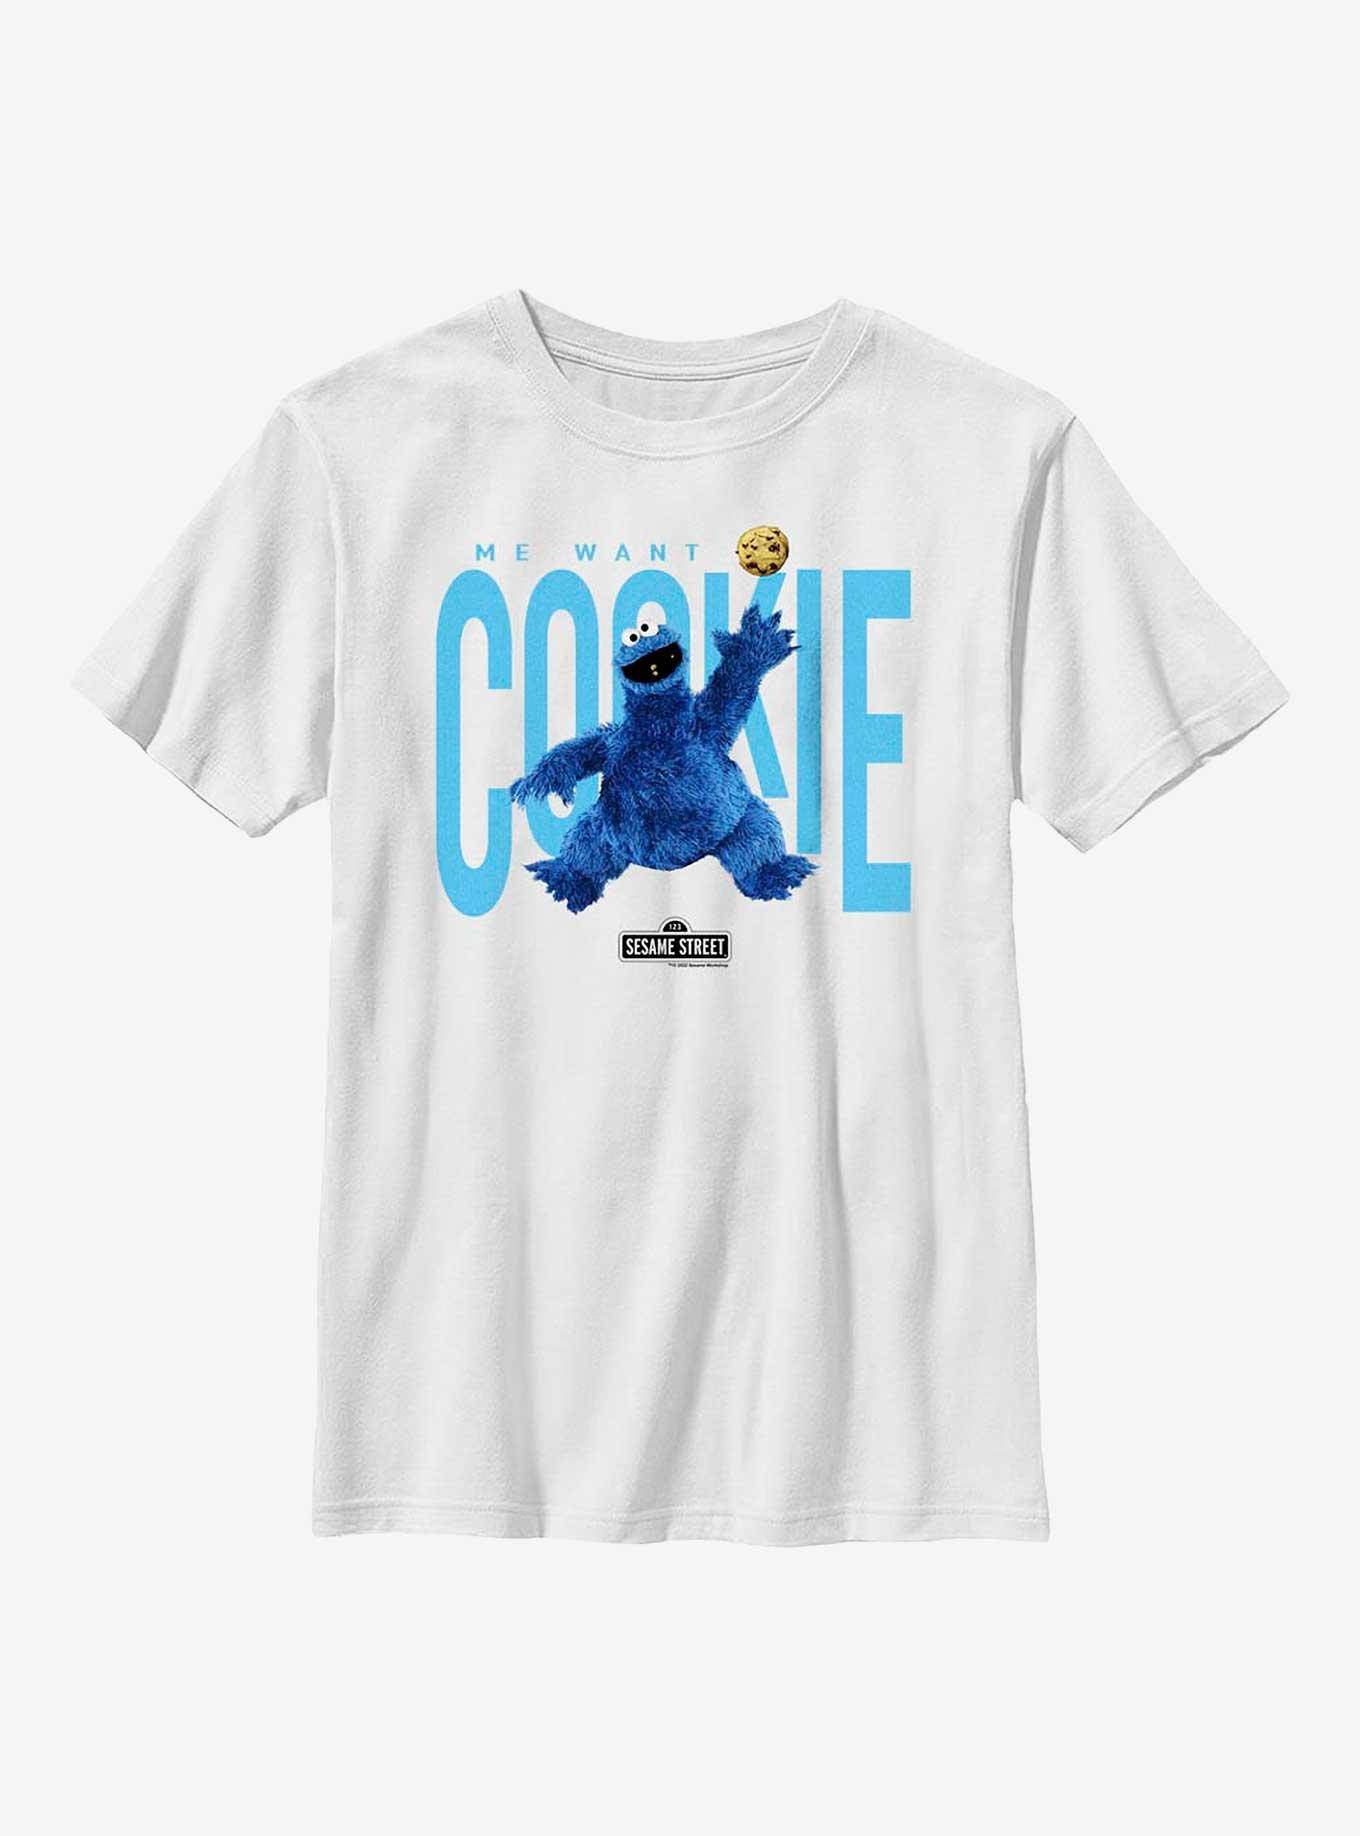 Sesame Street Air Cookie Monster Want Cookie Youth T-Shirt, WHITE, hi-res